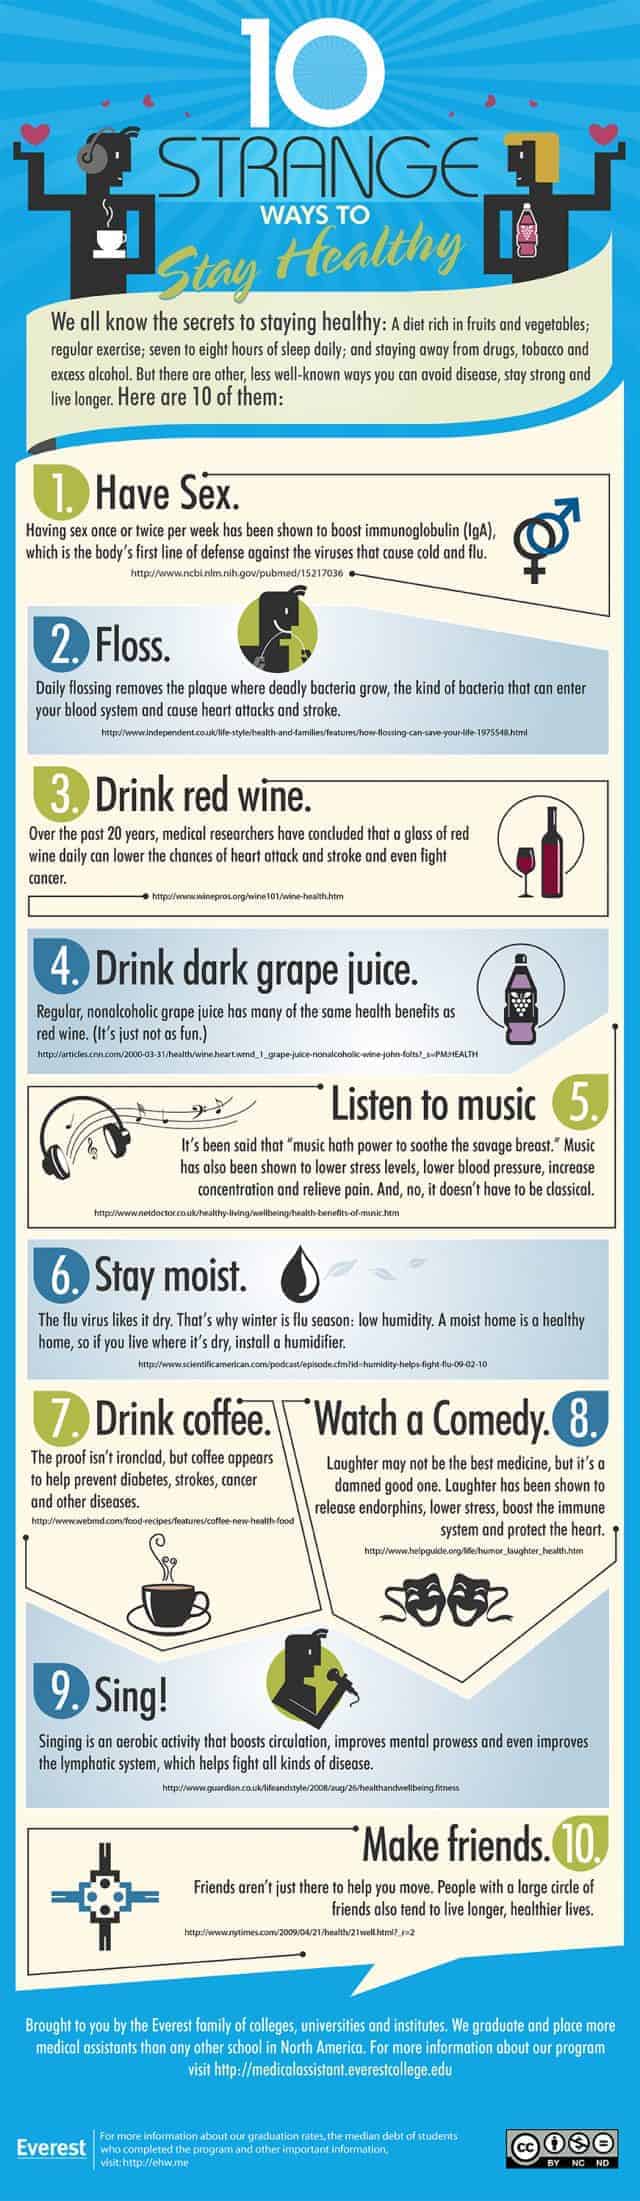 10 Strange Ways to Stay Healthy Infographic